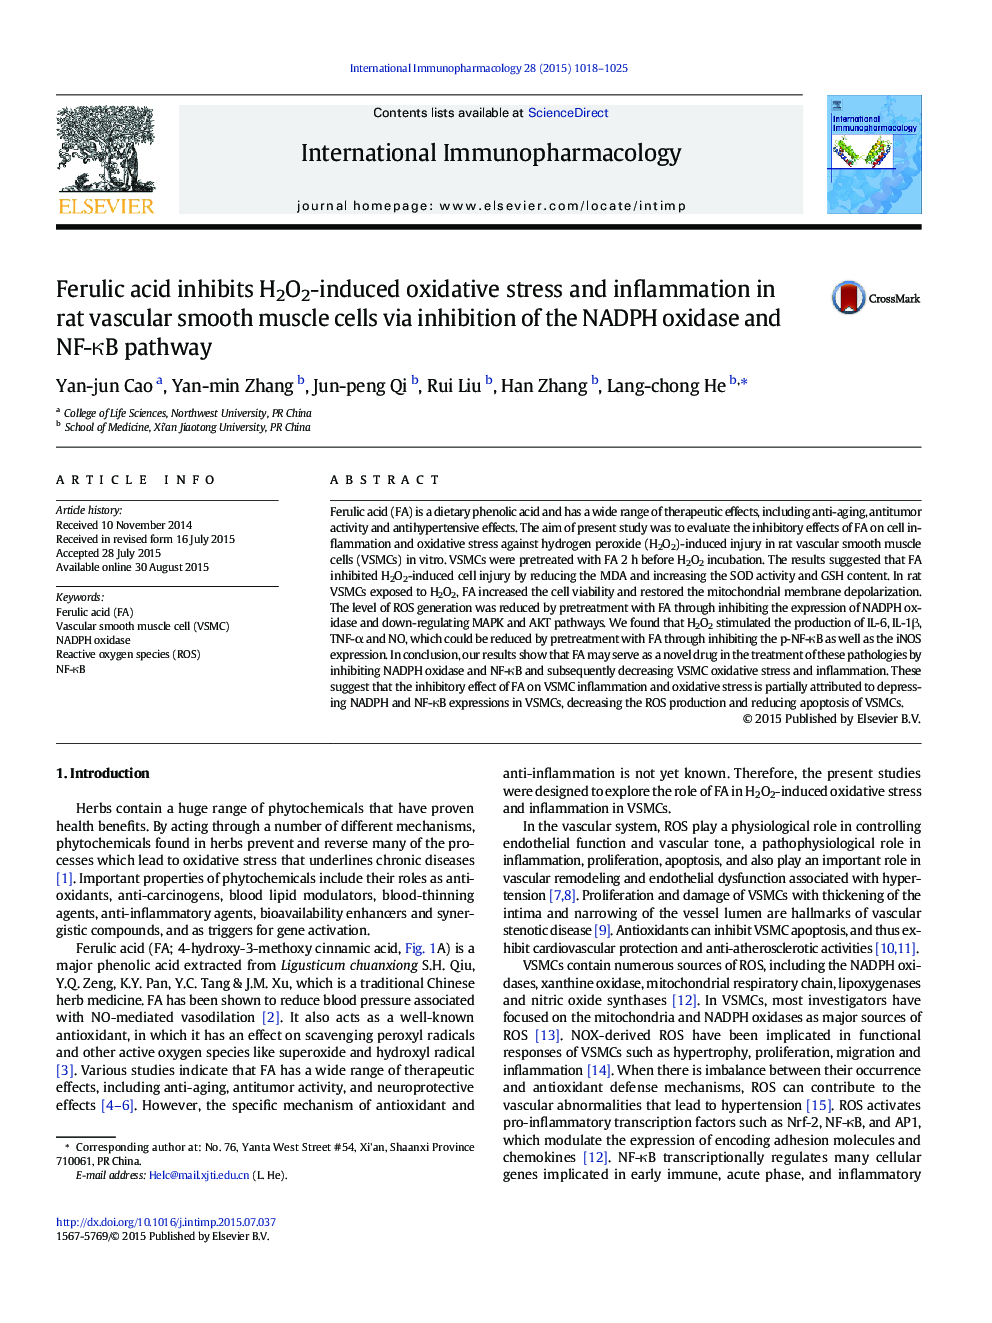 Ferulic acid inhibits H2O2-induced oxidative stress and inflammation in rat vascular smooth muscle cells via inhibition of the NADPH oxidase and NF-κB pathway